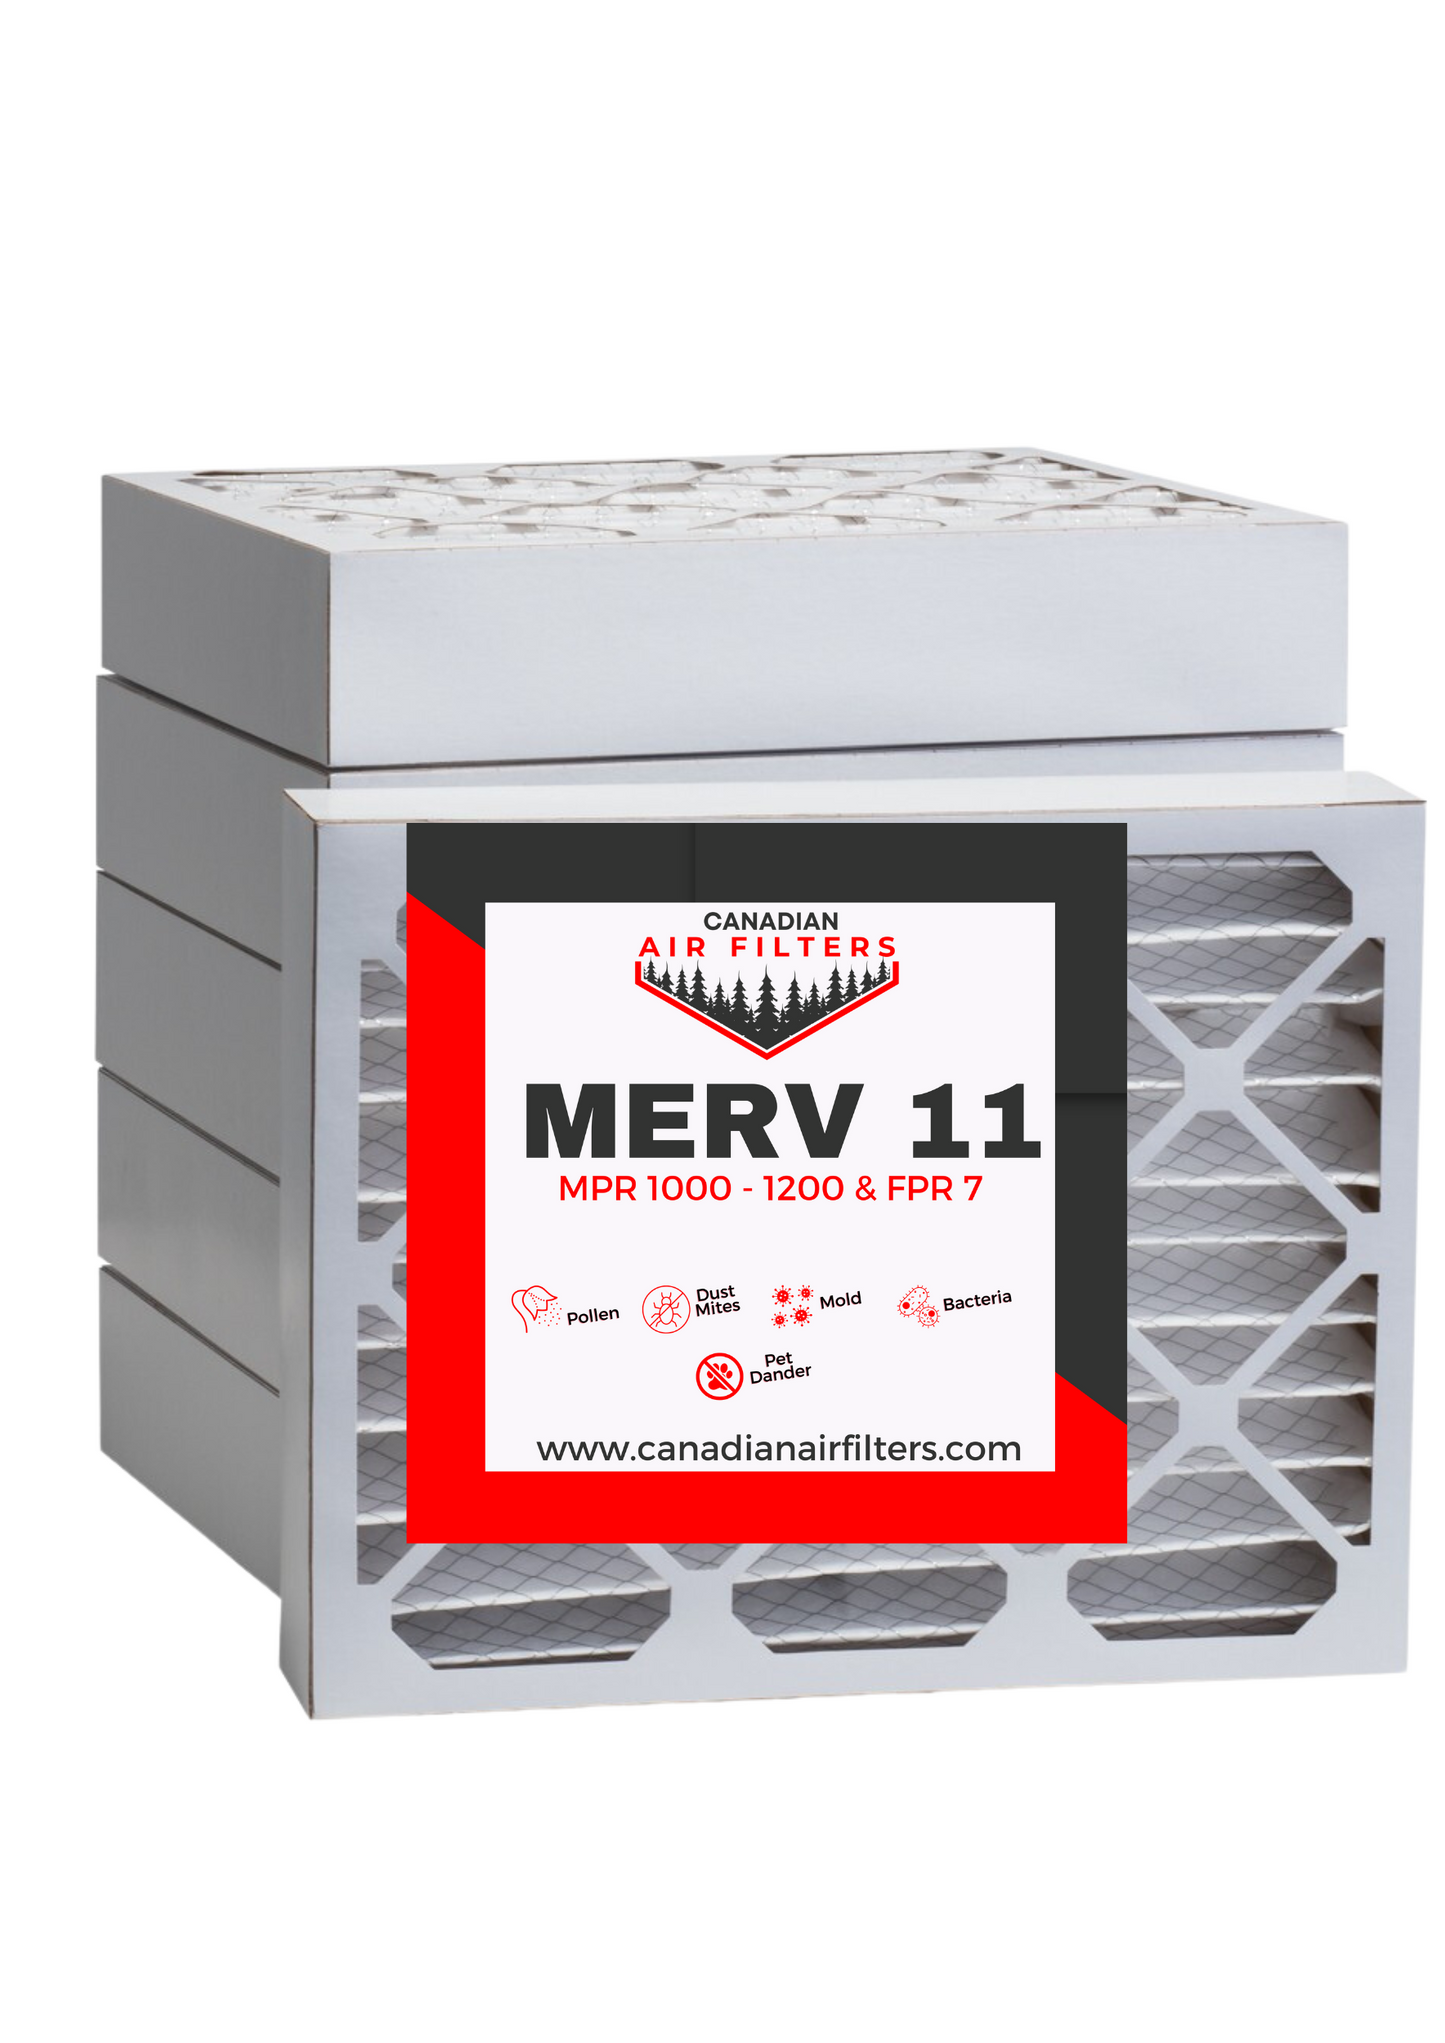 20 x 20 x 4 MERV 11 Aftermarket Replacement Filter (04 pack)